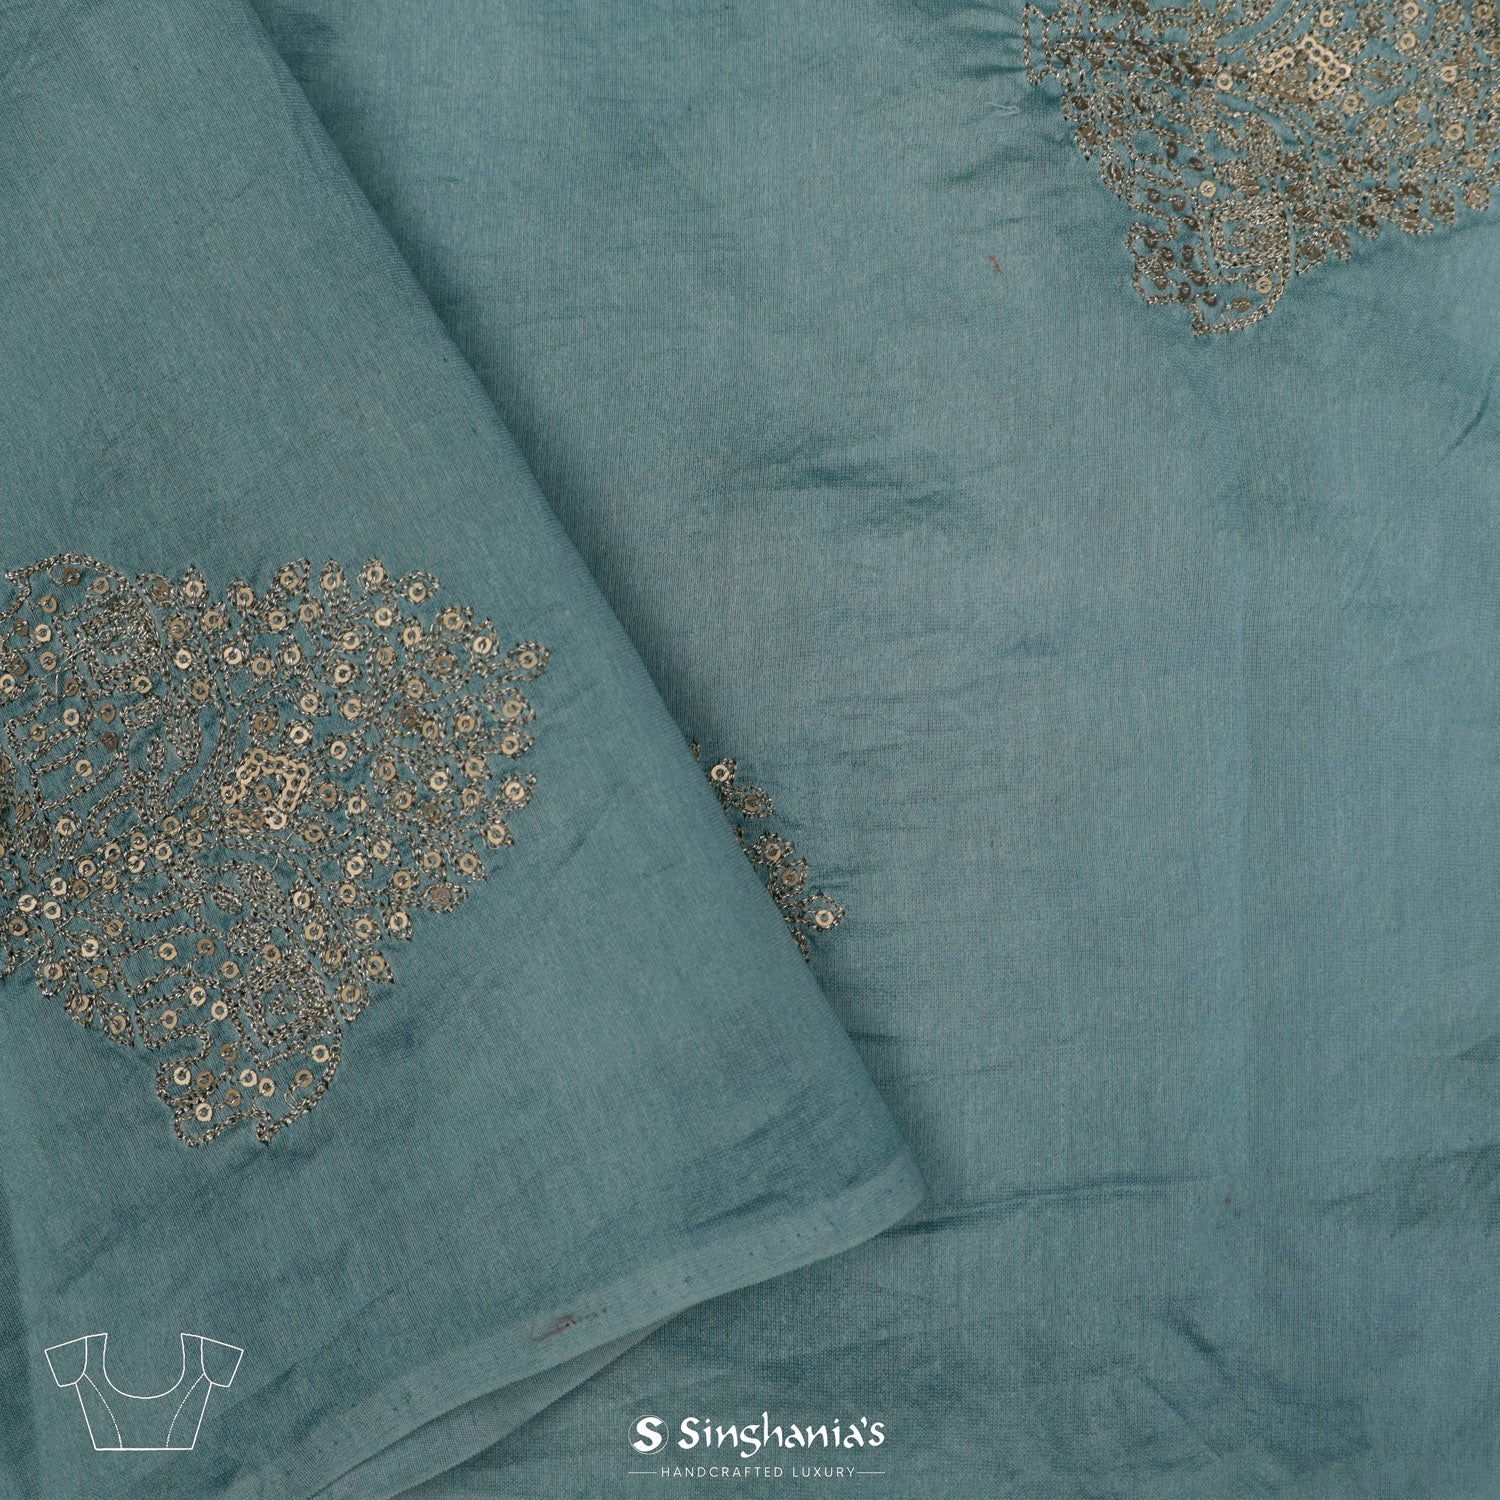 Tiffany Blue Organza Saree With Mukaish Work In Floral Pattern